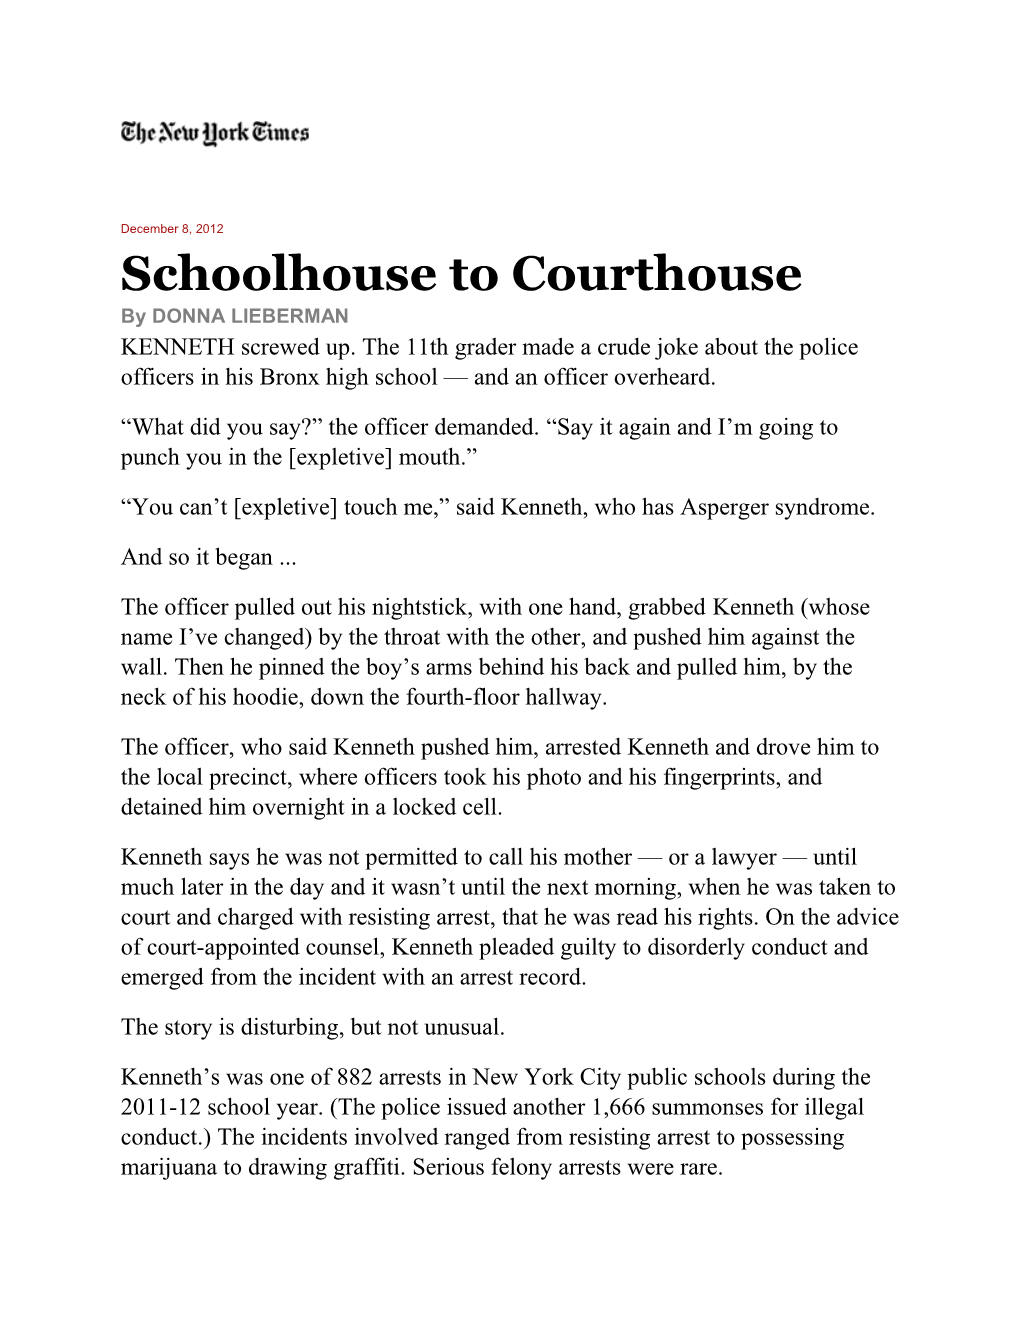 Schoolhouse to Courthouse